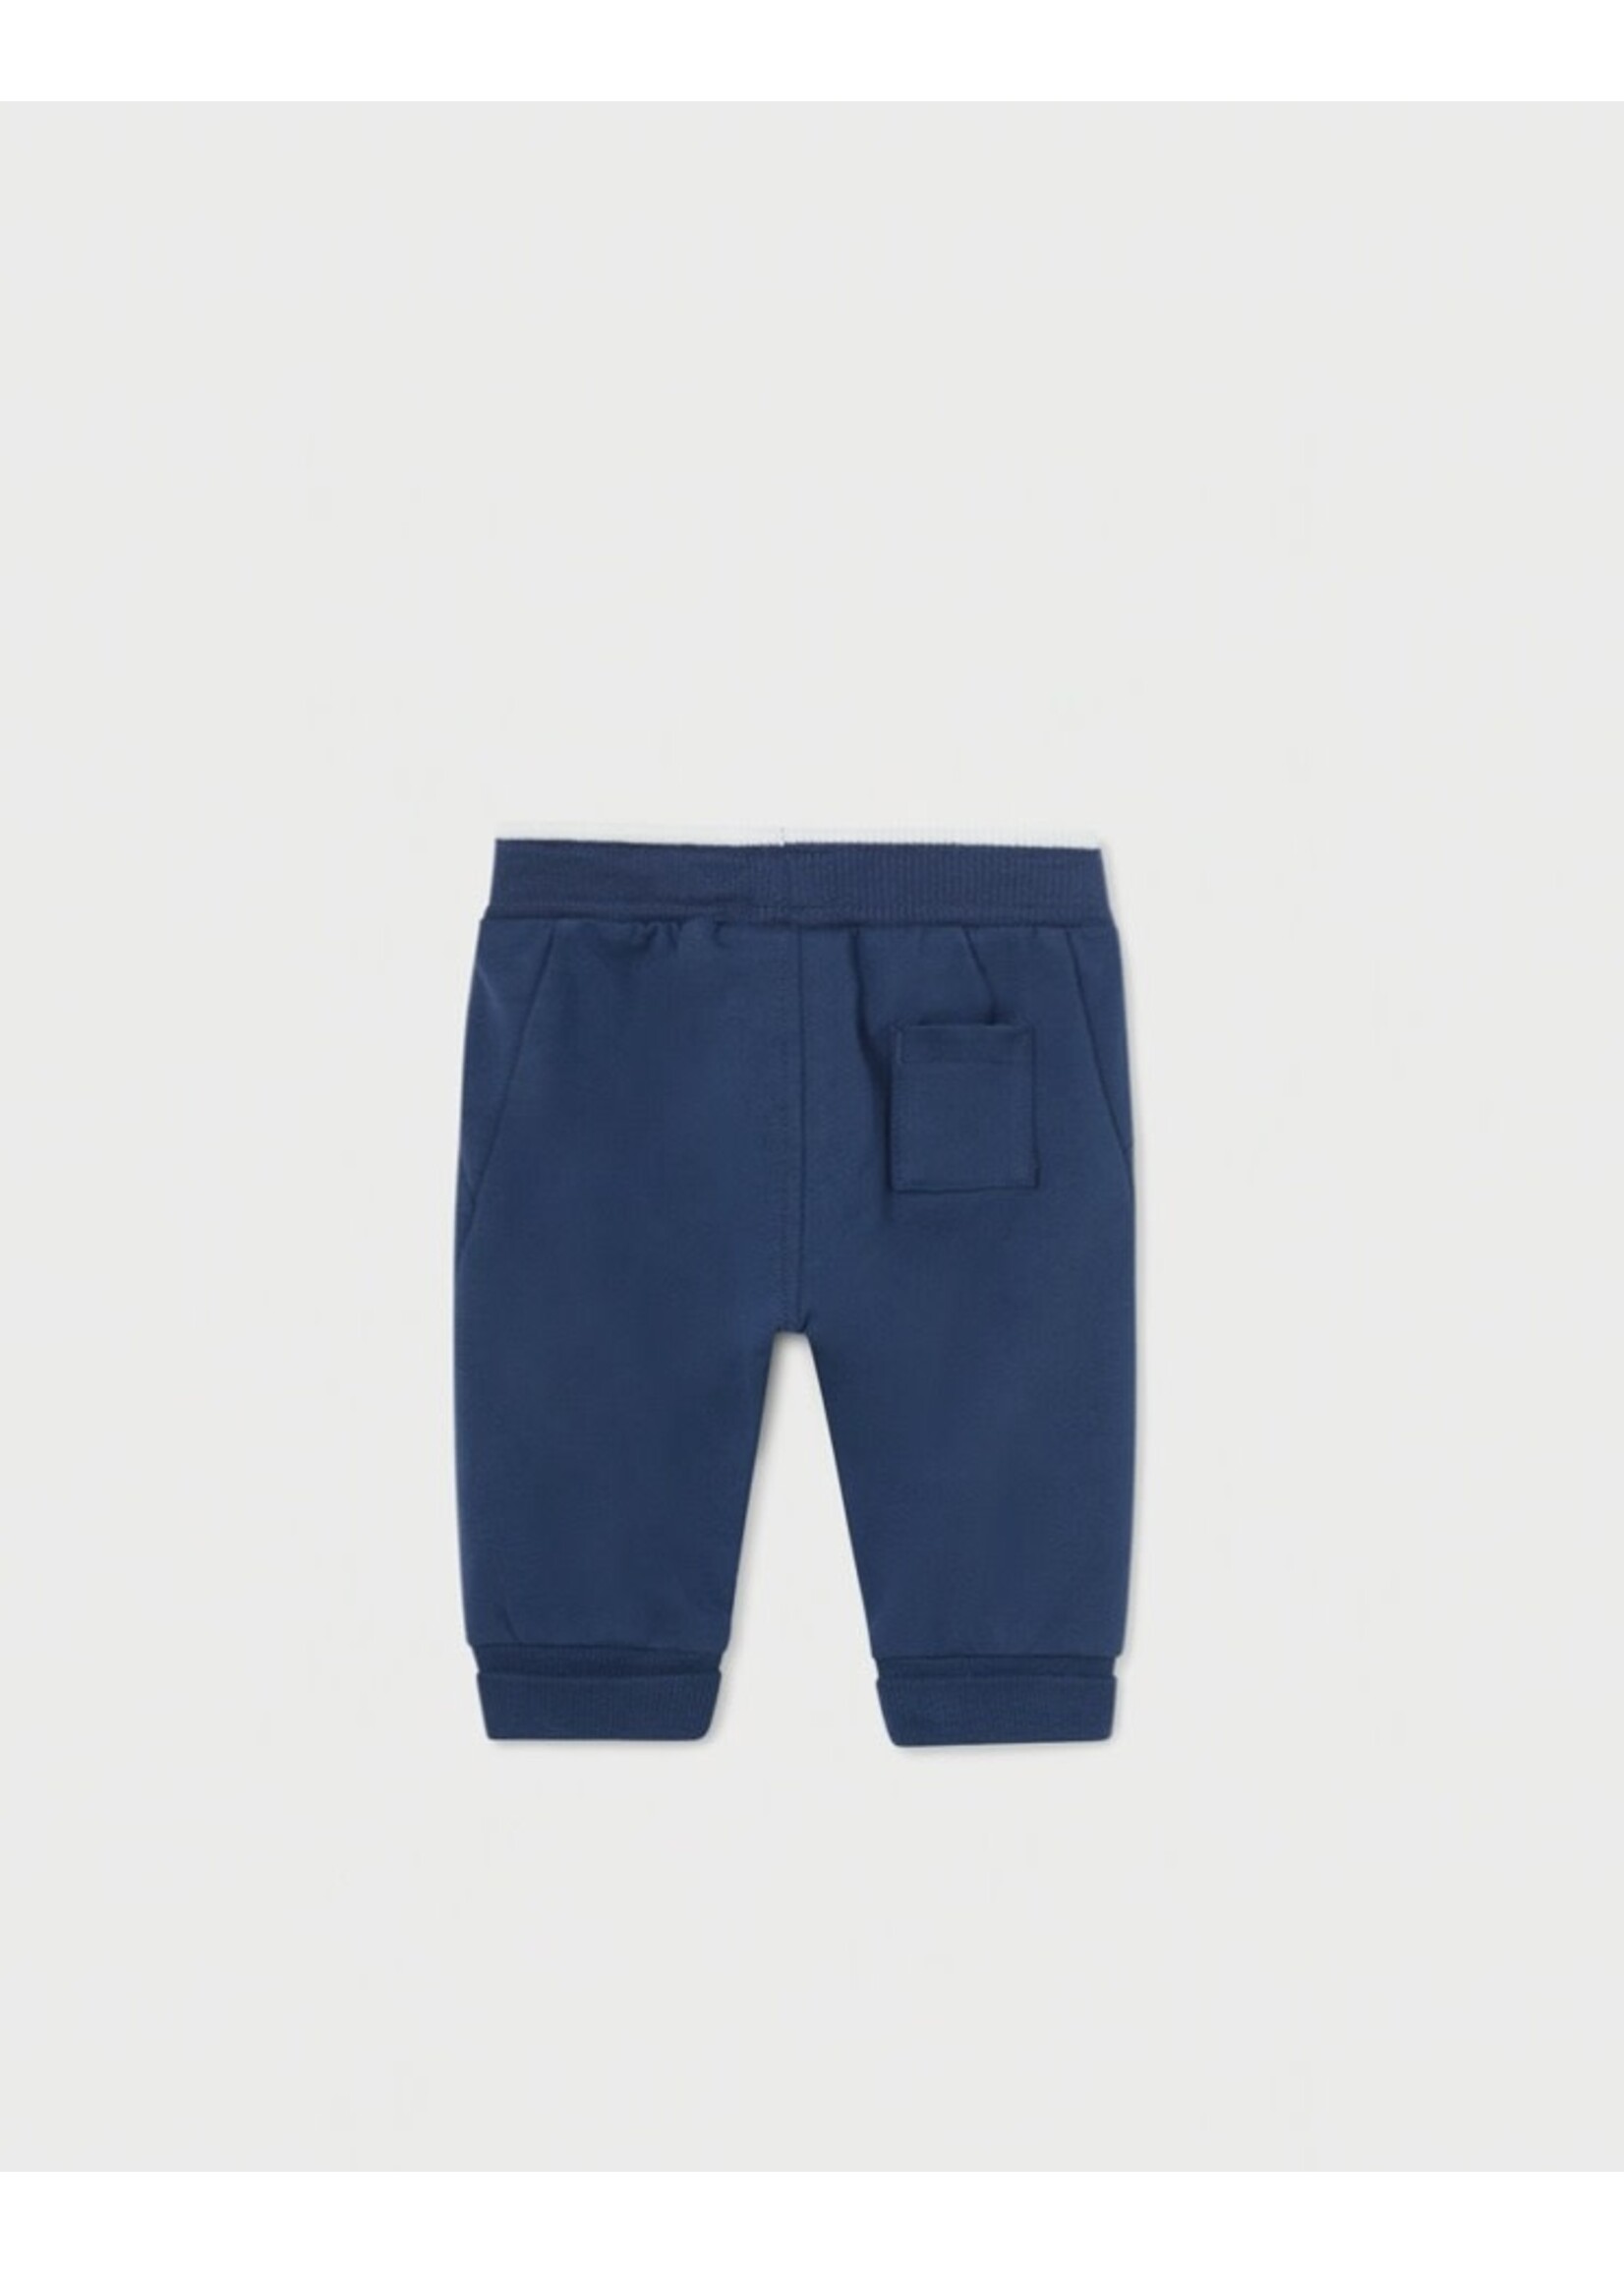 Mayoral Mayoral, Newborn Better Cotton Joggers || Navy